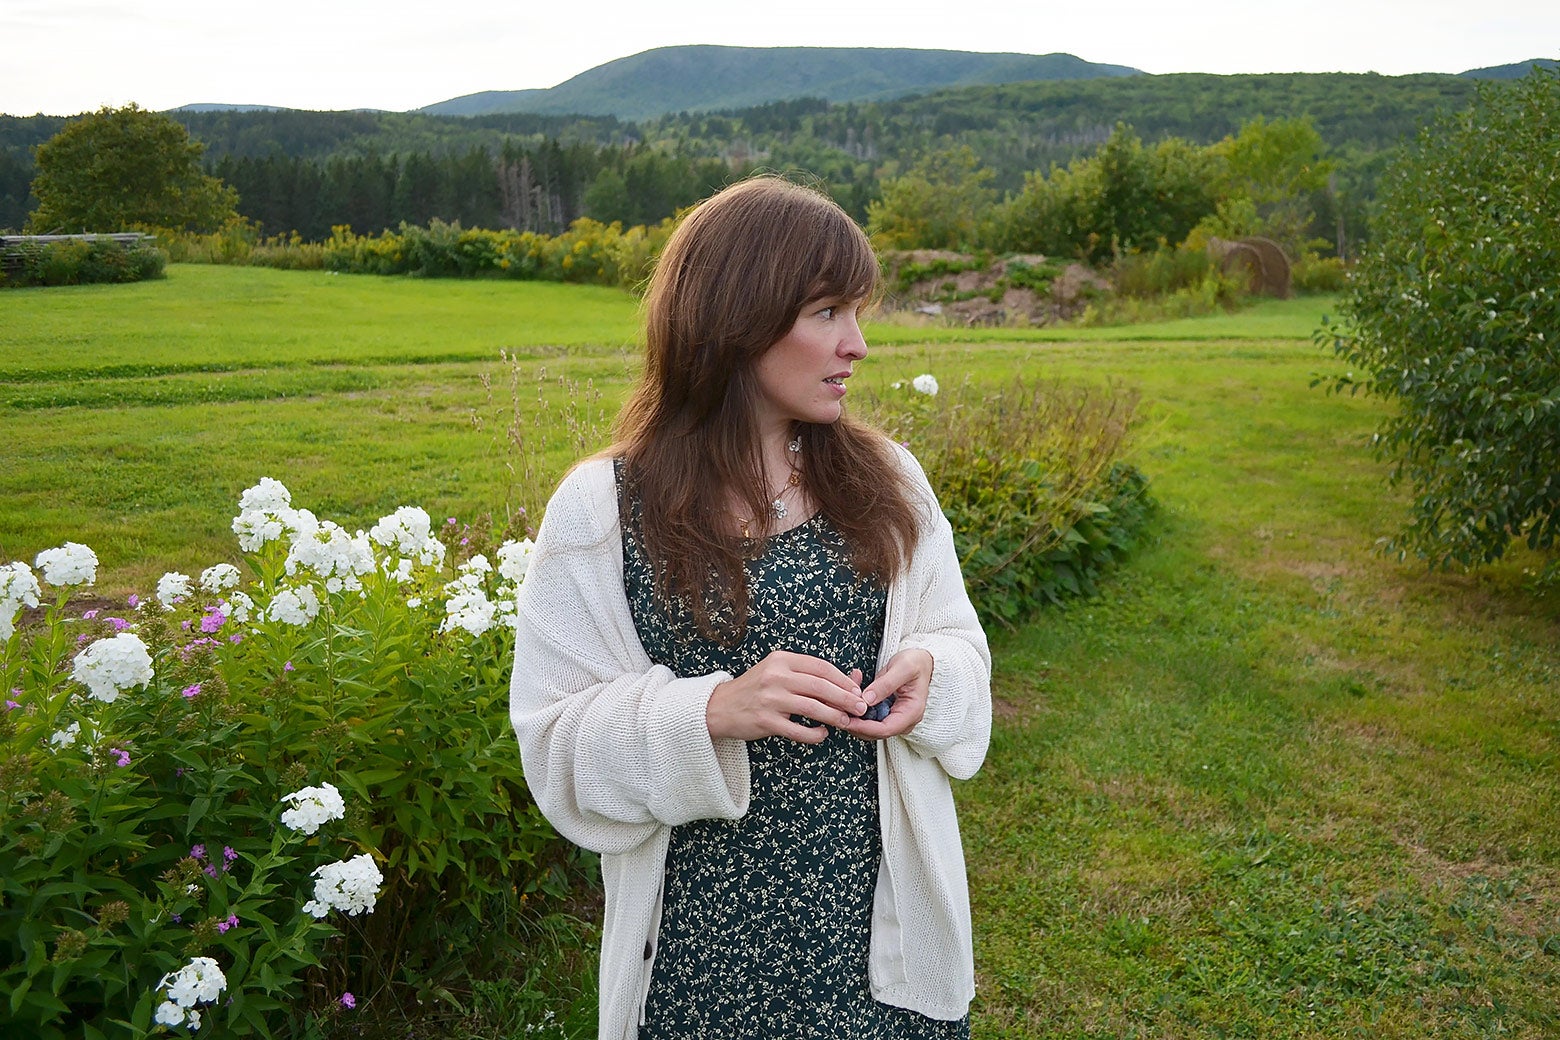 A woman wearing a dress stands in a field, looking to her right.